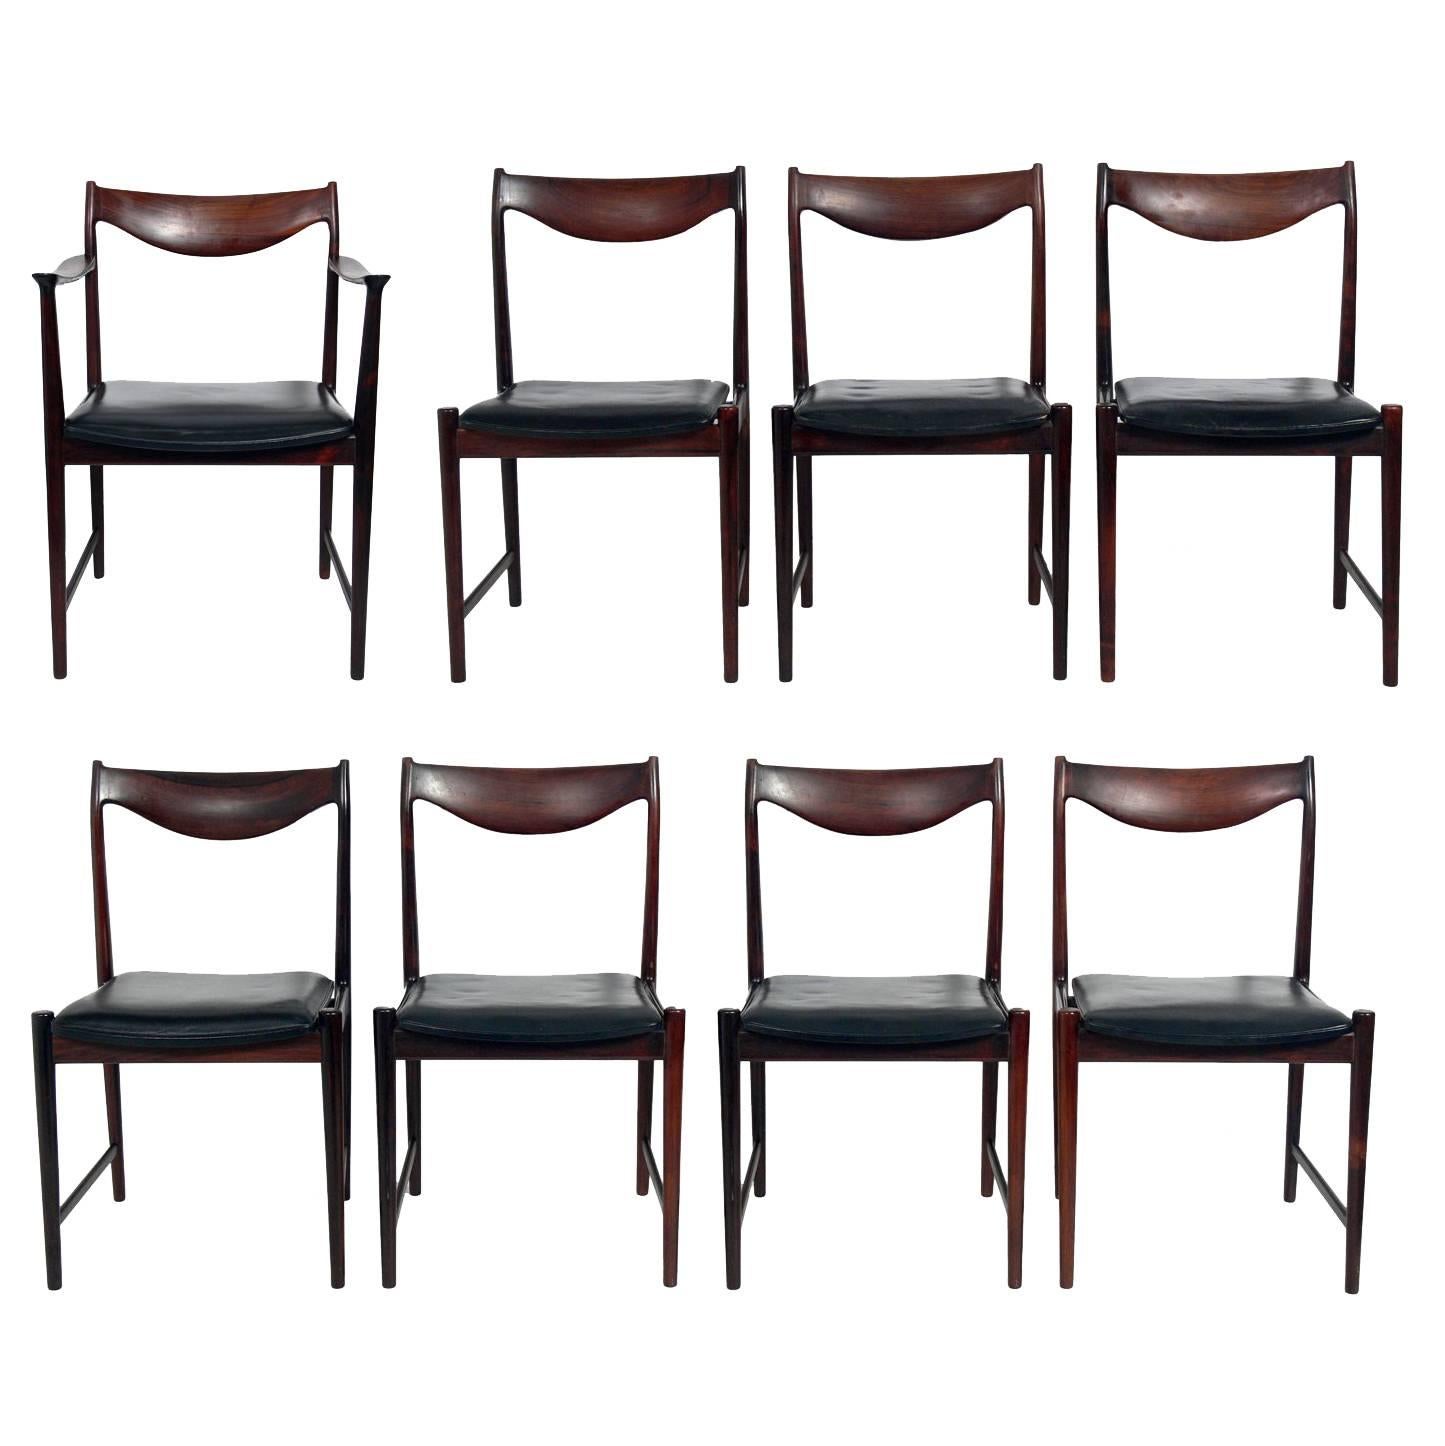 Set of Eight Danish Modern Rosewood Dining Chairs designed by Torbjorn Afdal for Nesjestranda Mobelfabrik, Norway, circa 1960s. Incredible graining to the rosewood. They have been reupholstered in a low maintenance leather like black vinyl. 